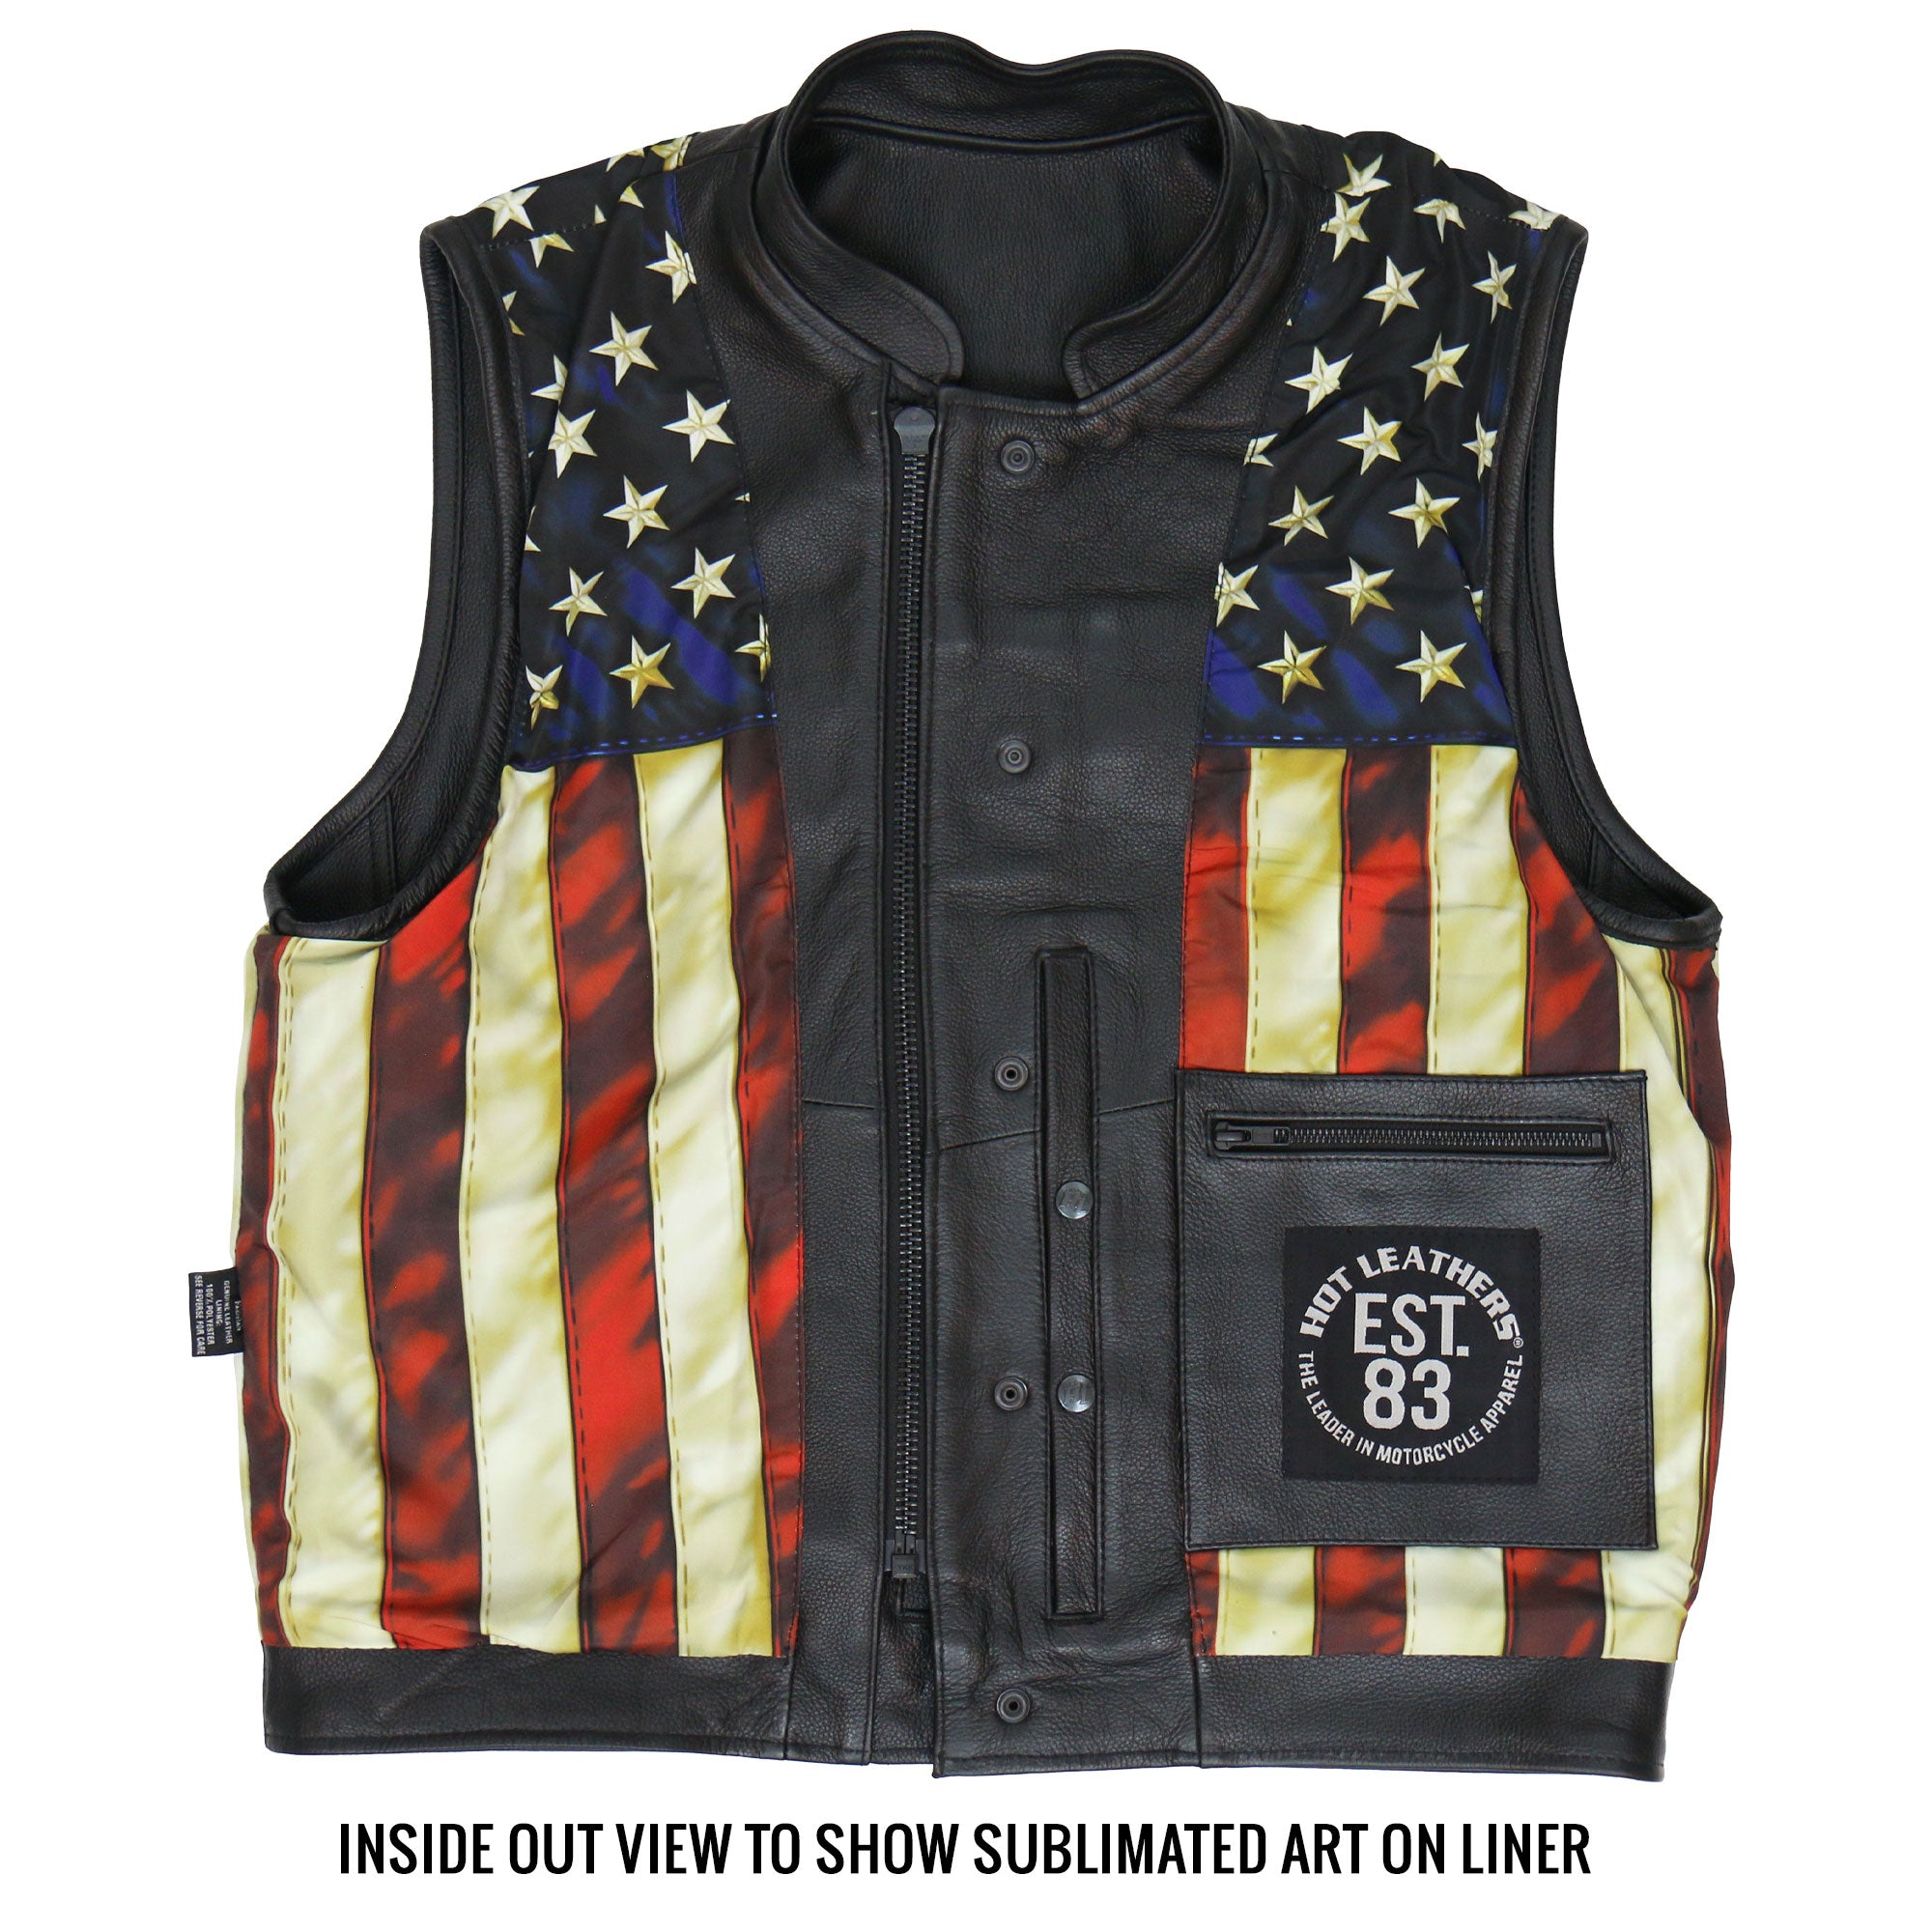 Hot Leathers VSM1056 Men's Black 'Vintage USA Flag' Motorcycle Club Style Conceal and Carry Leather Biker Vest